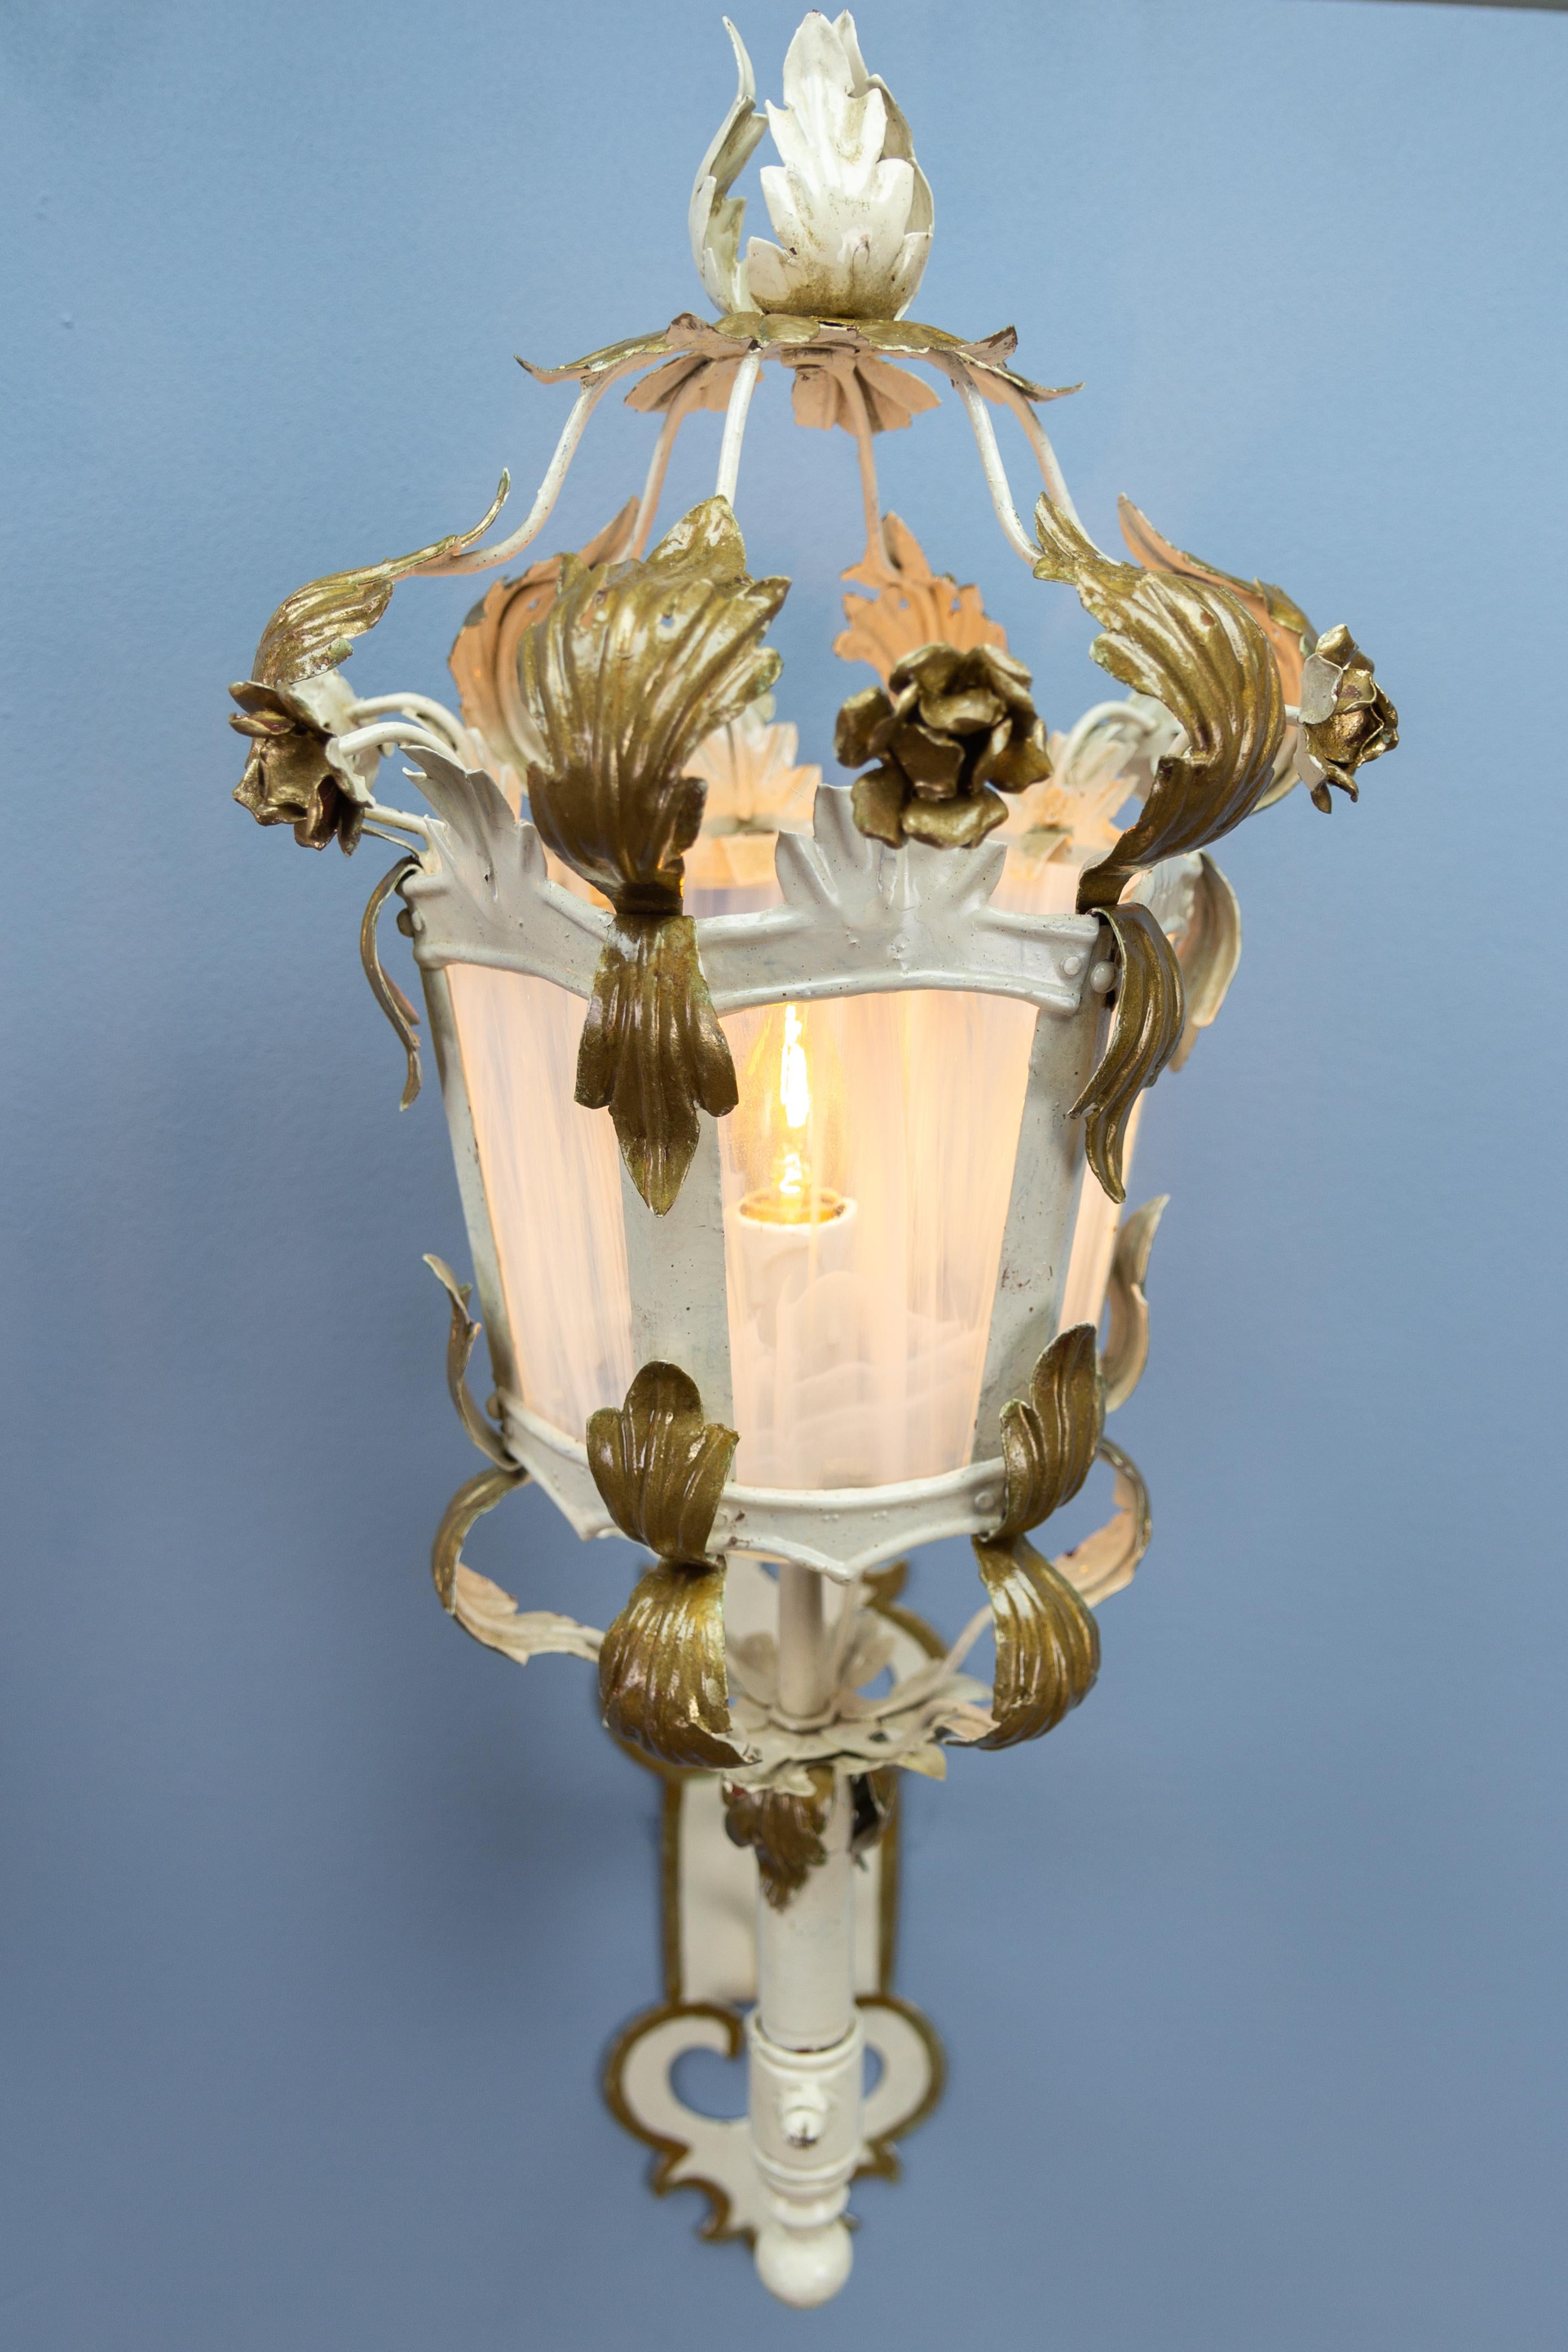 Pair of Italian White and Golden Color Metal and Glass Wall Lanterns, ca. 1970s For Sale 2